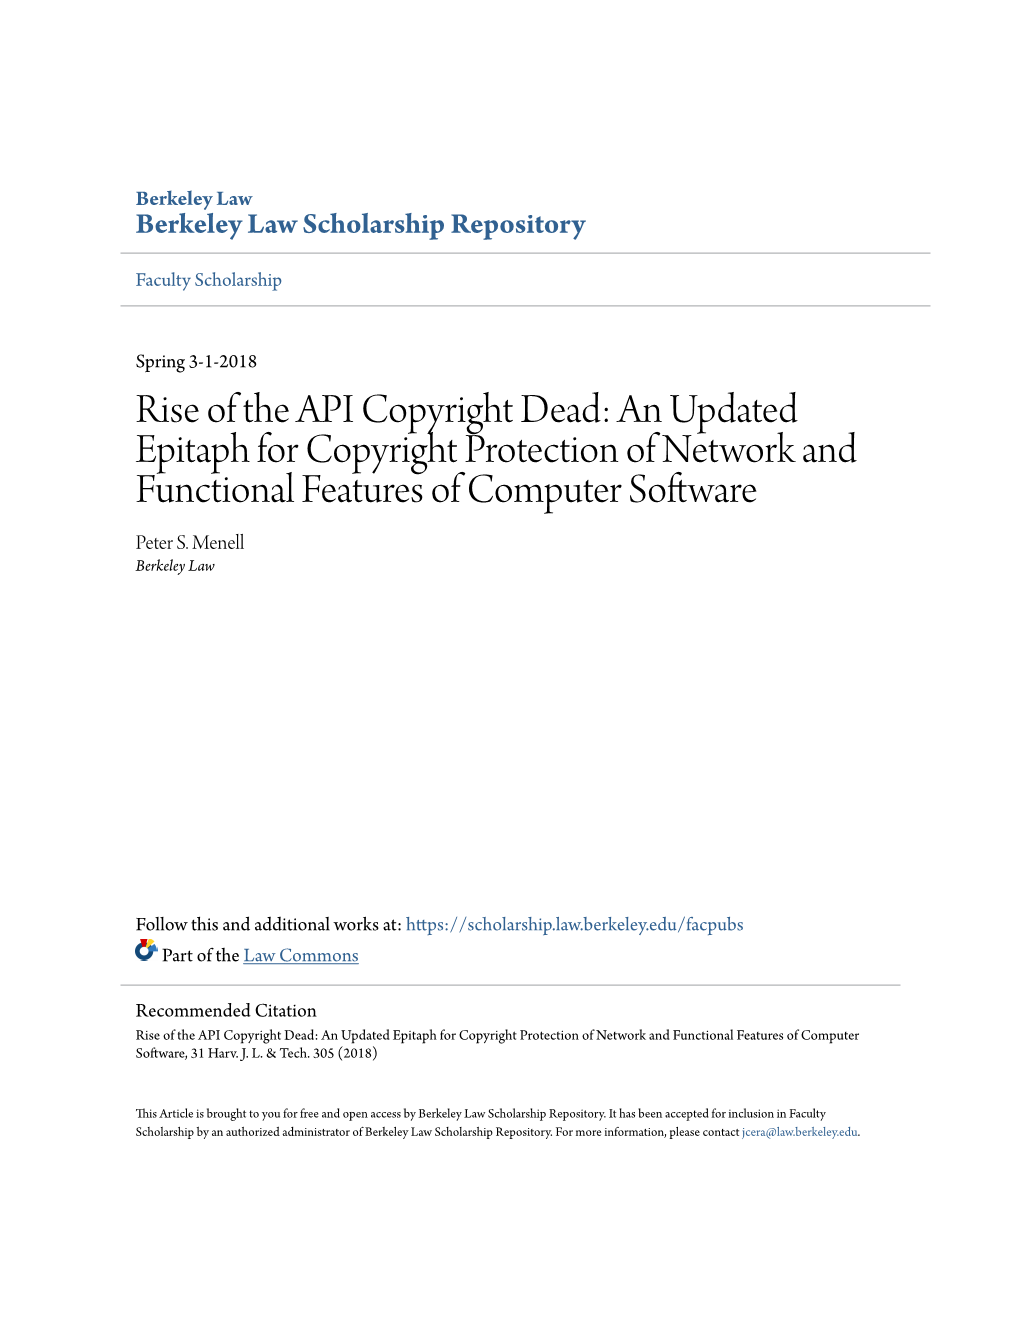 Rise of the API Copyright Dead: an Updated Epitaph for Copyright Protection of Network and Functional Features of Computer Software Peter S